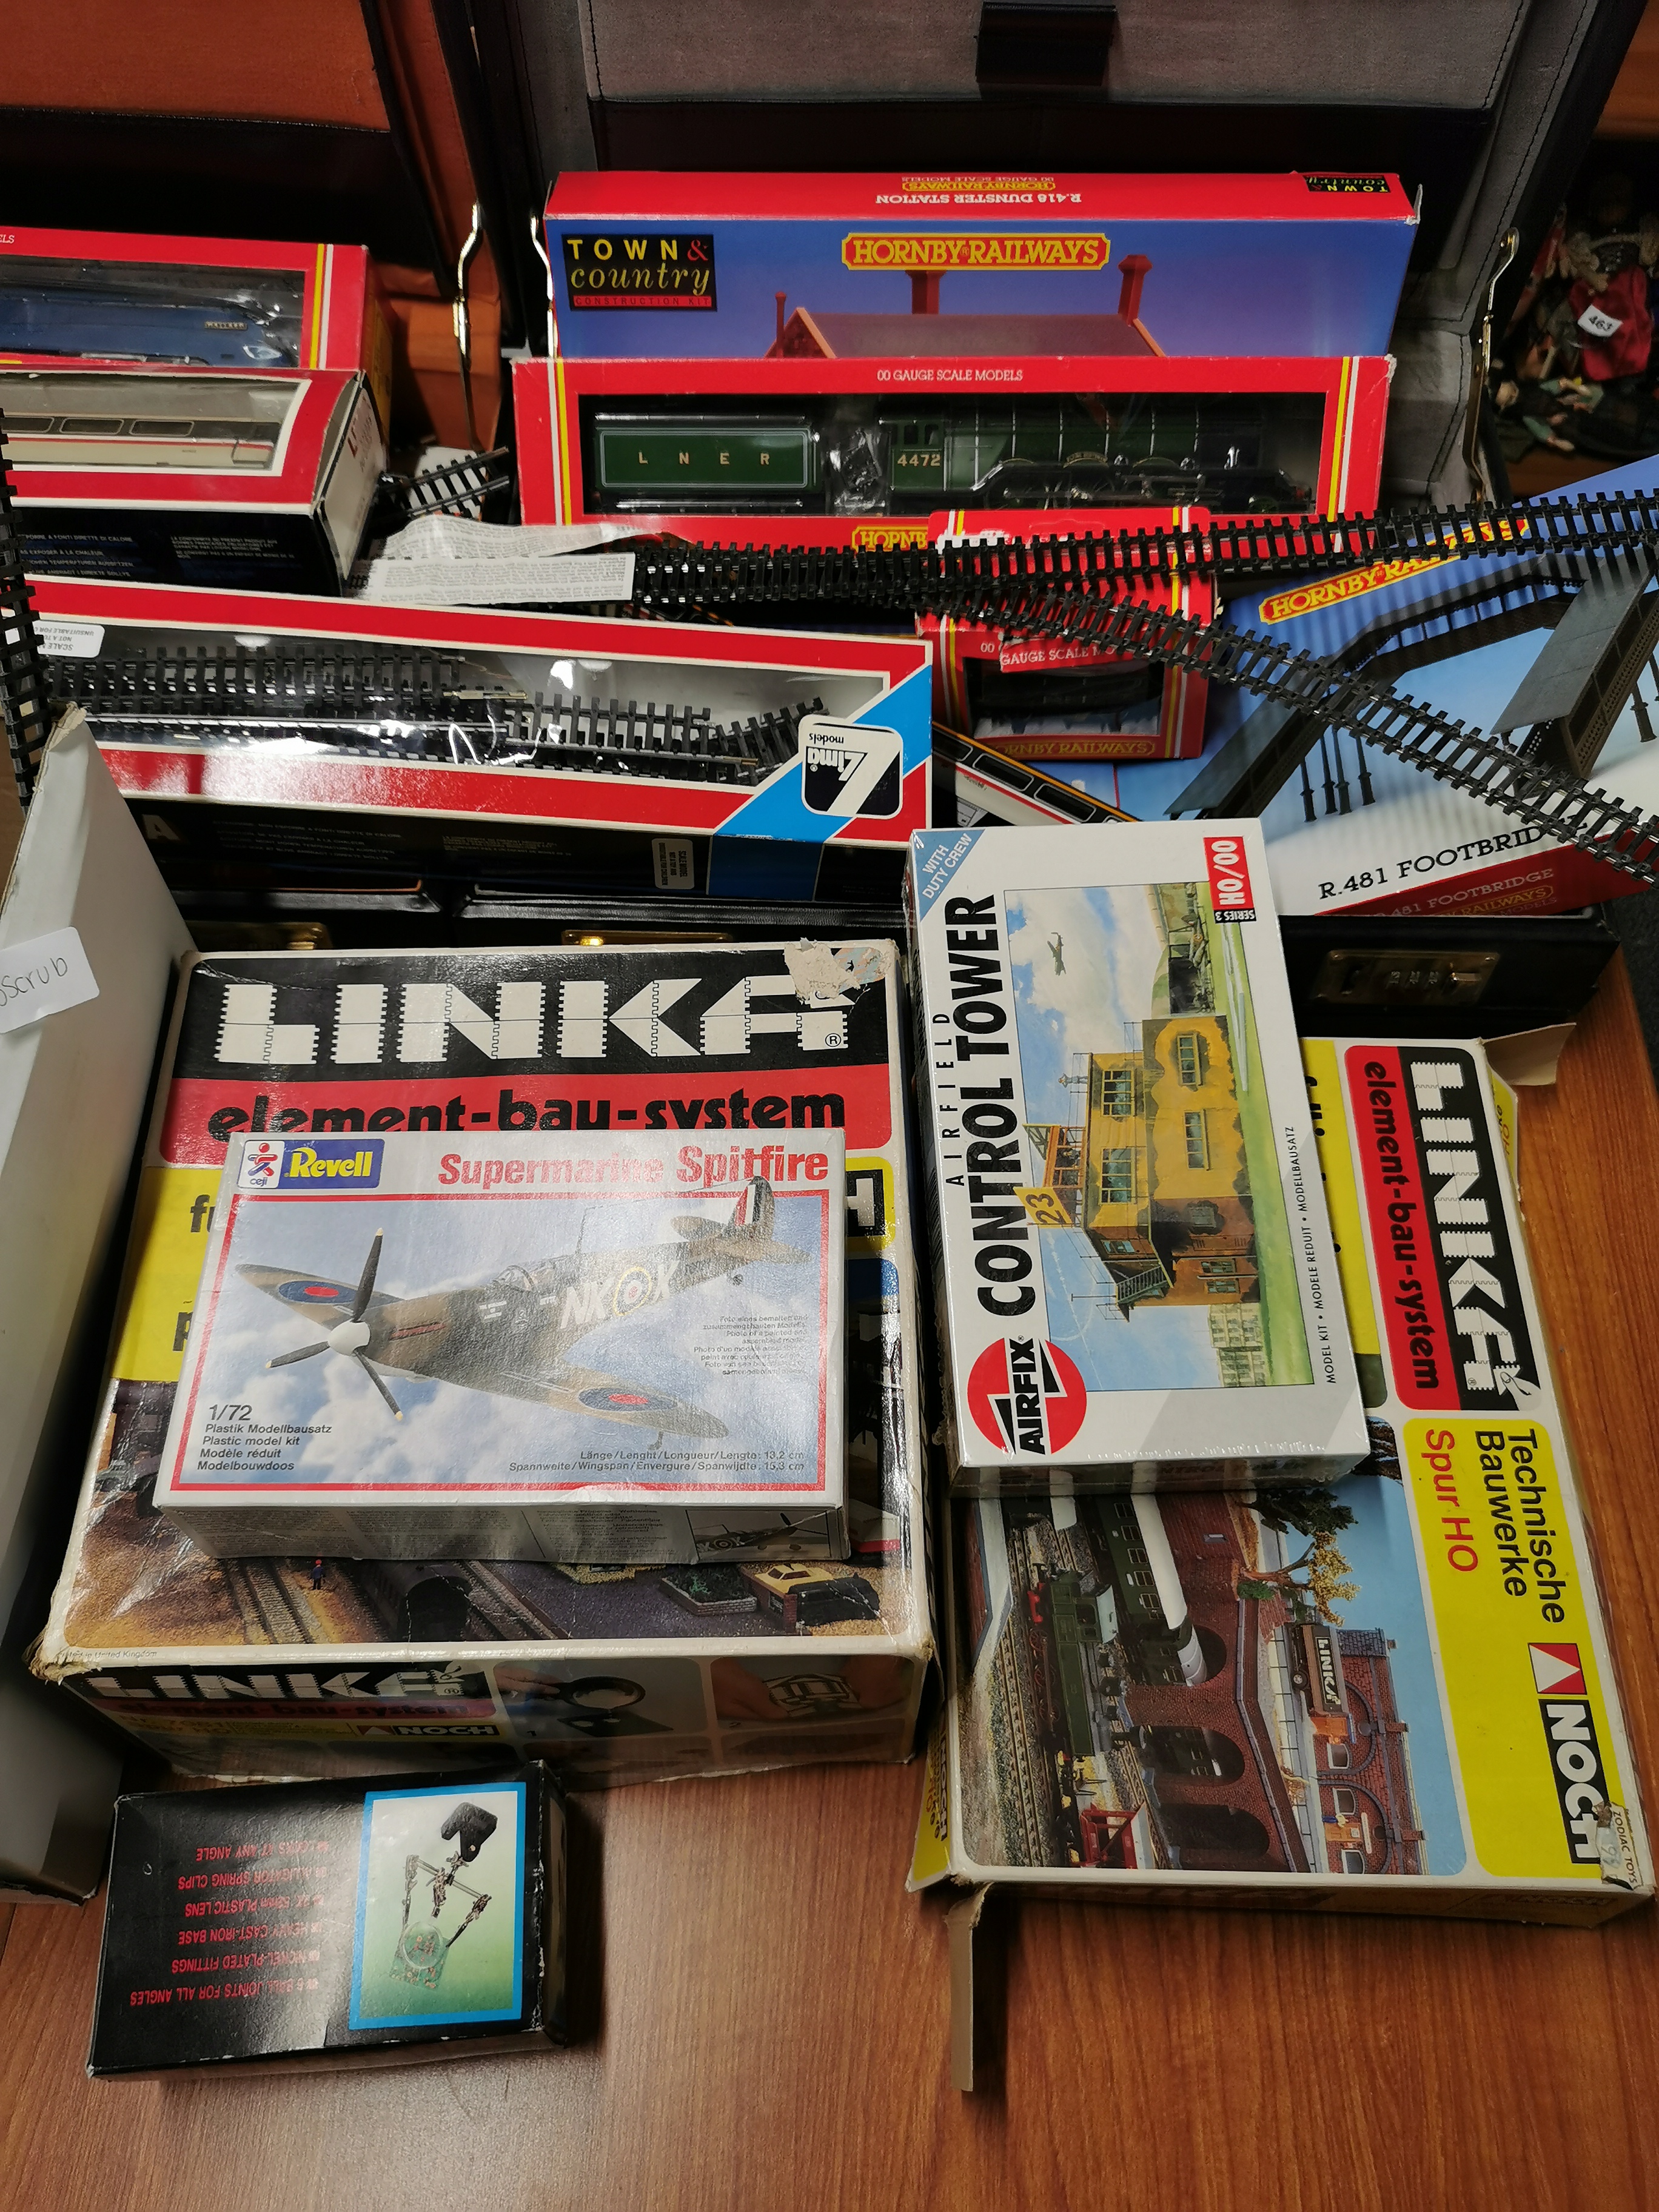 A quantity of Hornby 00 gauge railway items with Linka building kits and Airfix models. - Image 3 of 4